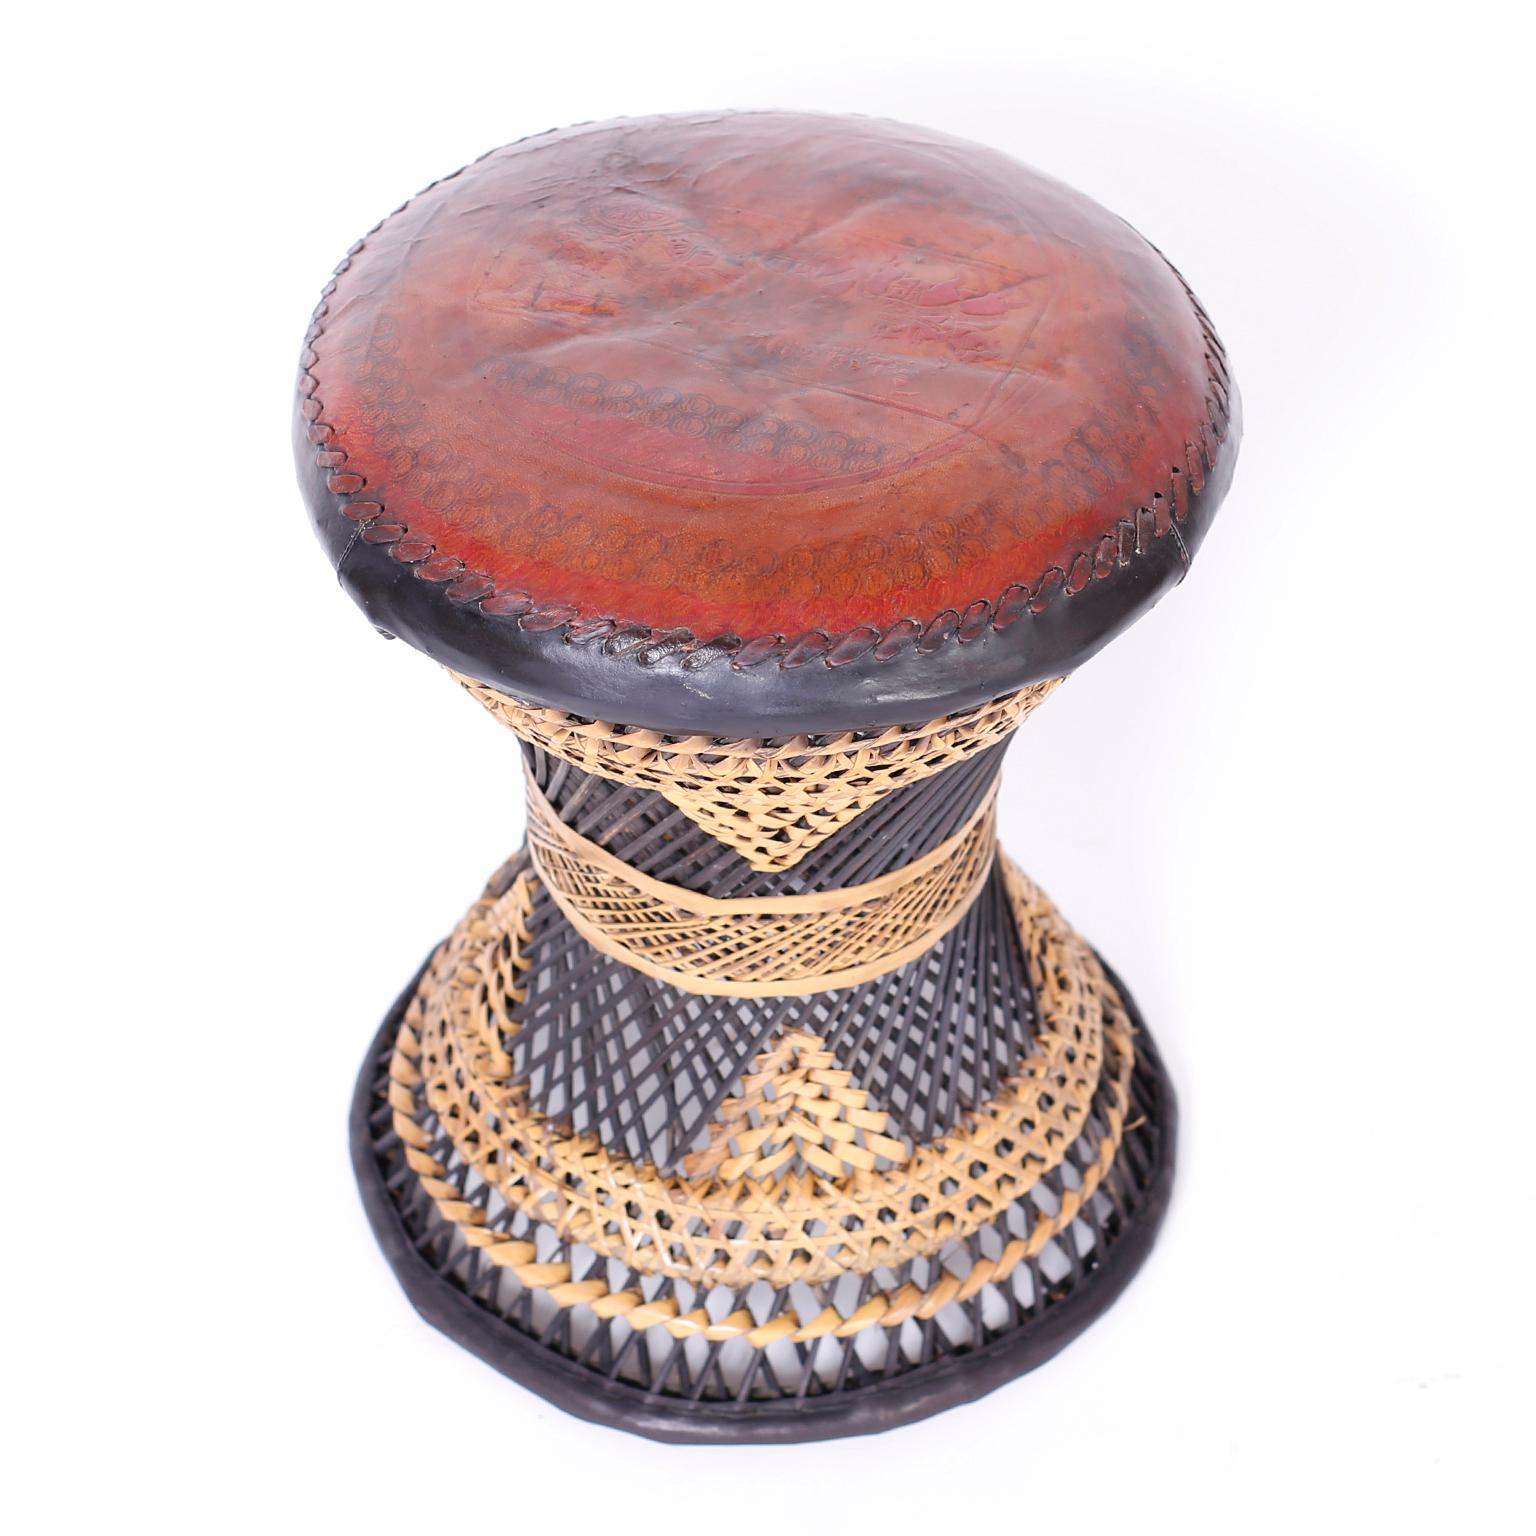 Footstool with a lush leather top embossed with a classical scene over a woven wicker base having an hourglass form.